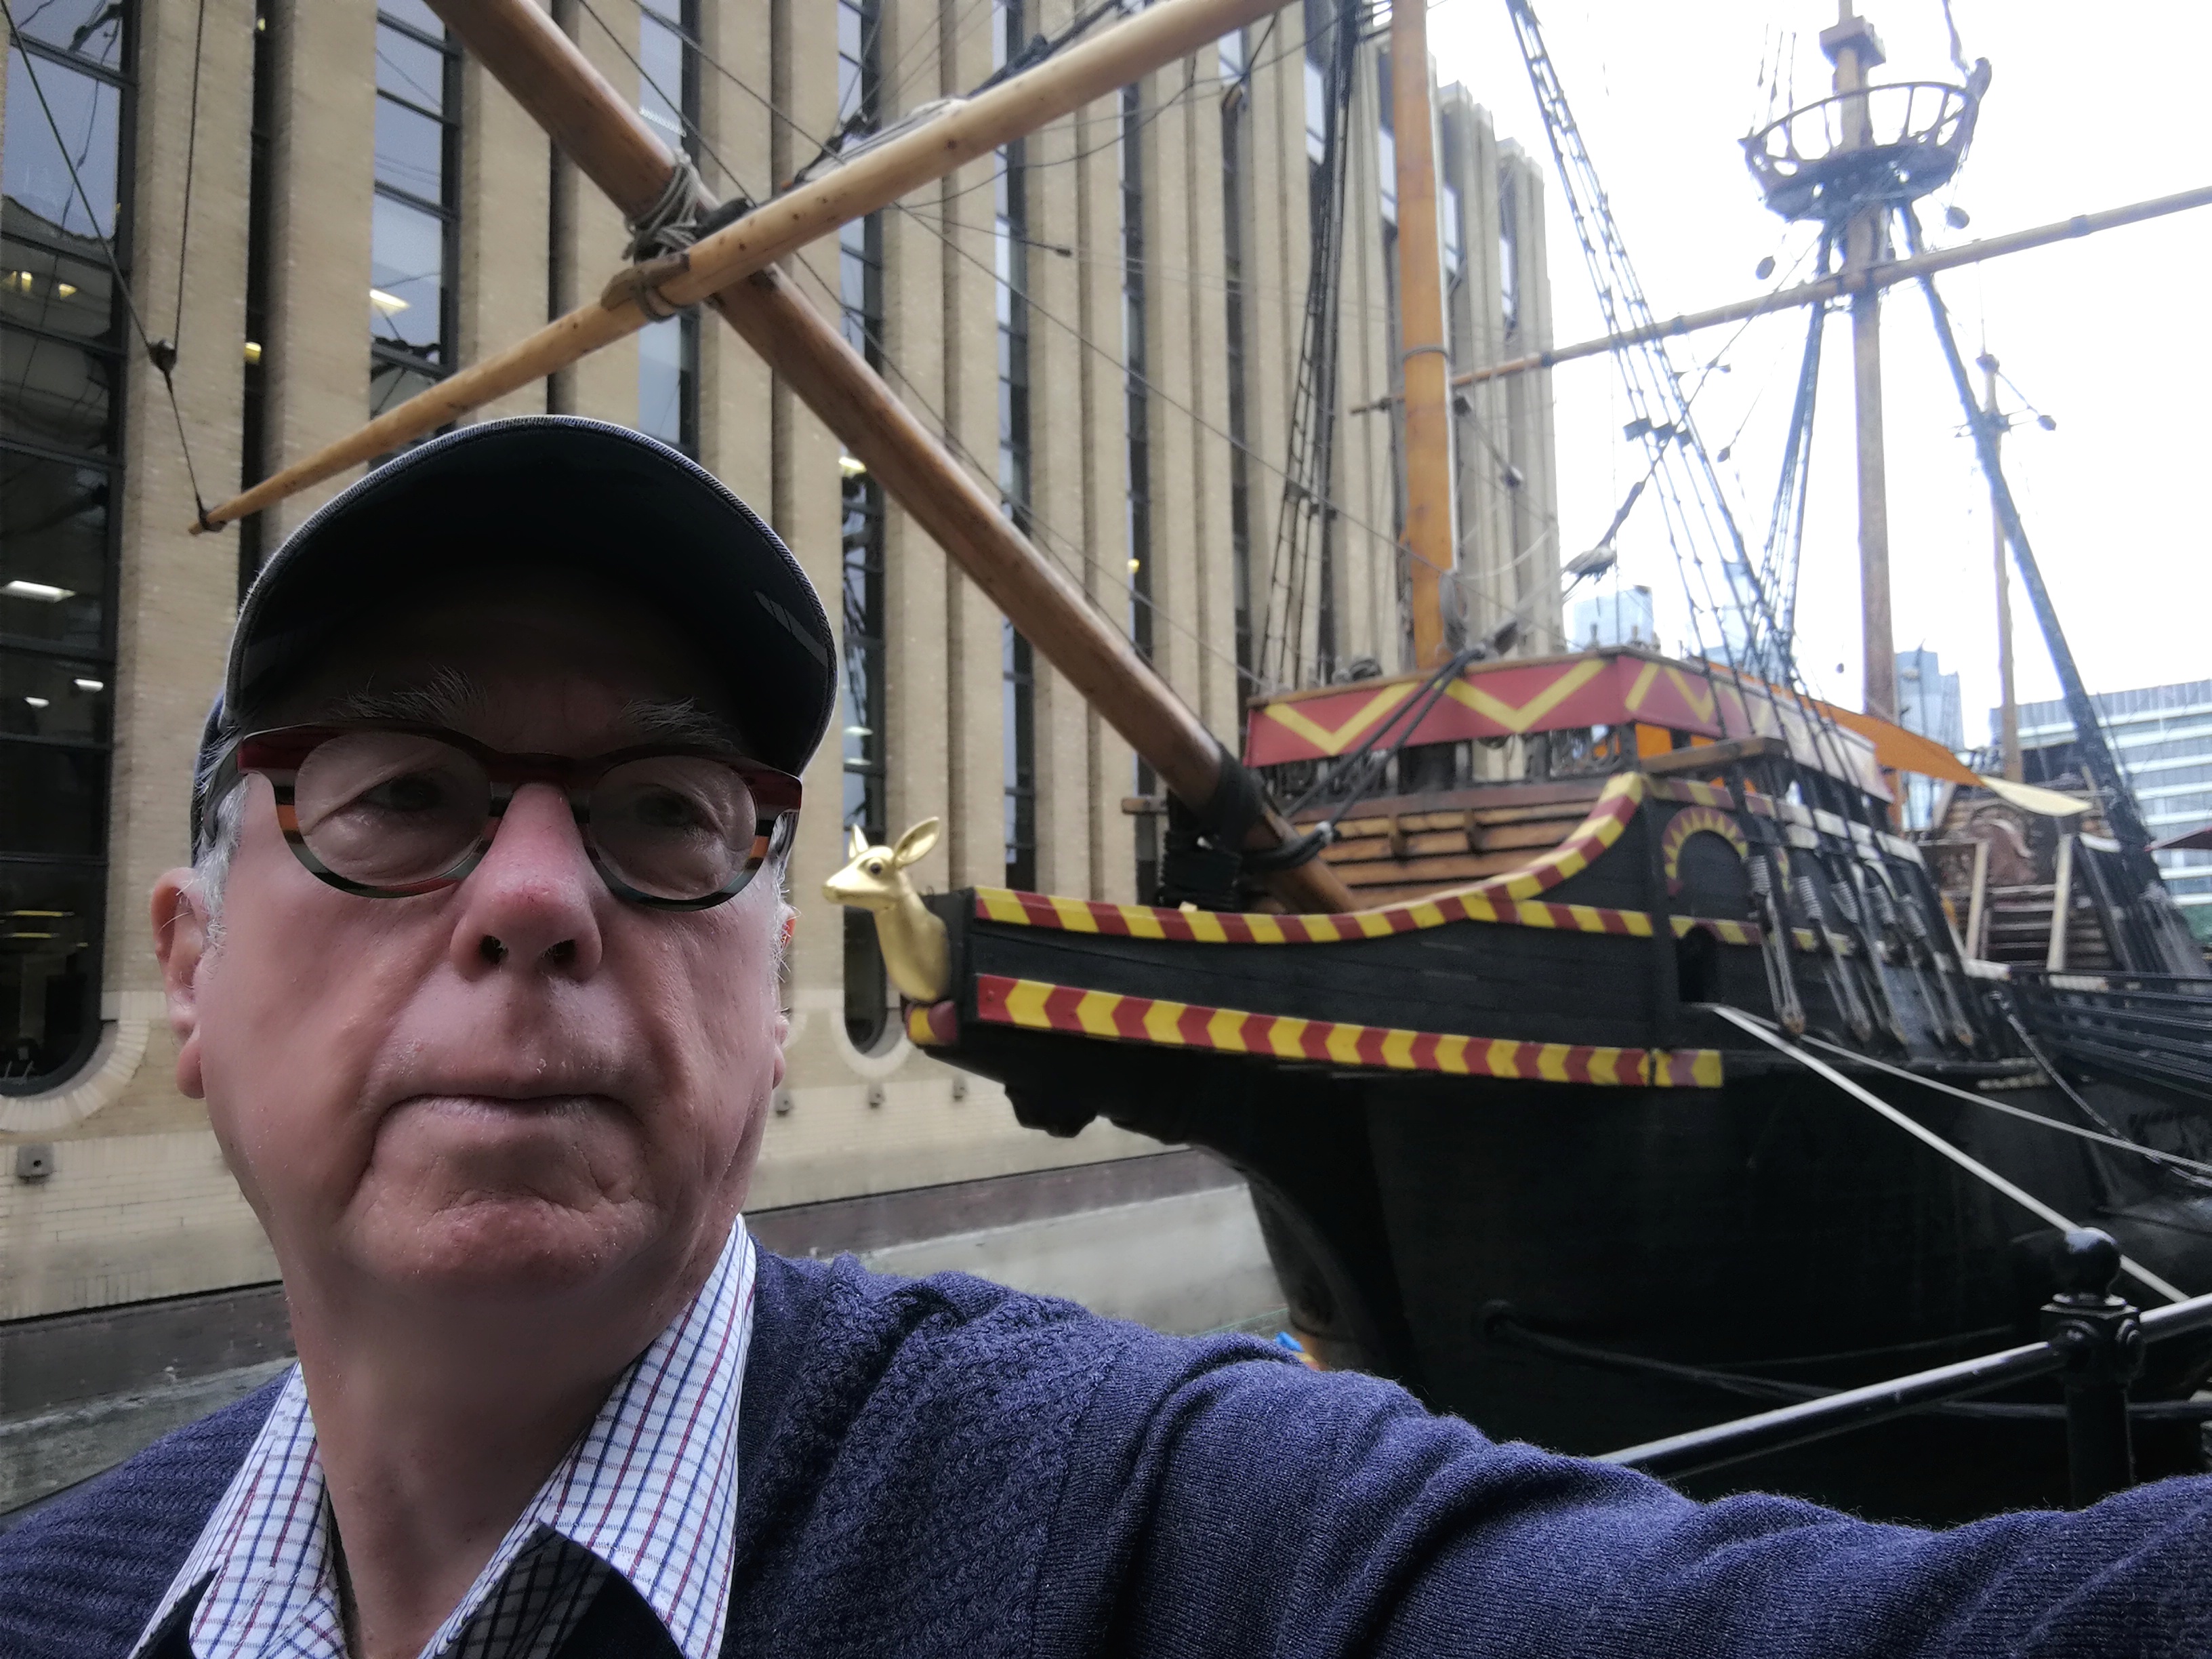 Ron Holland selfie with Golden Hind sailing ship in London UK